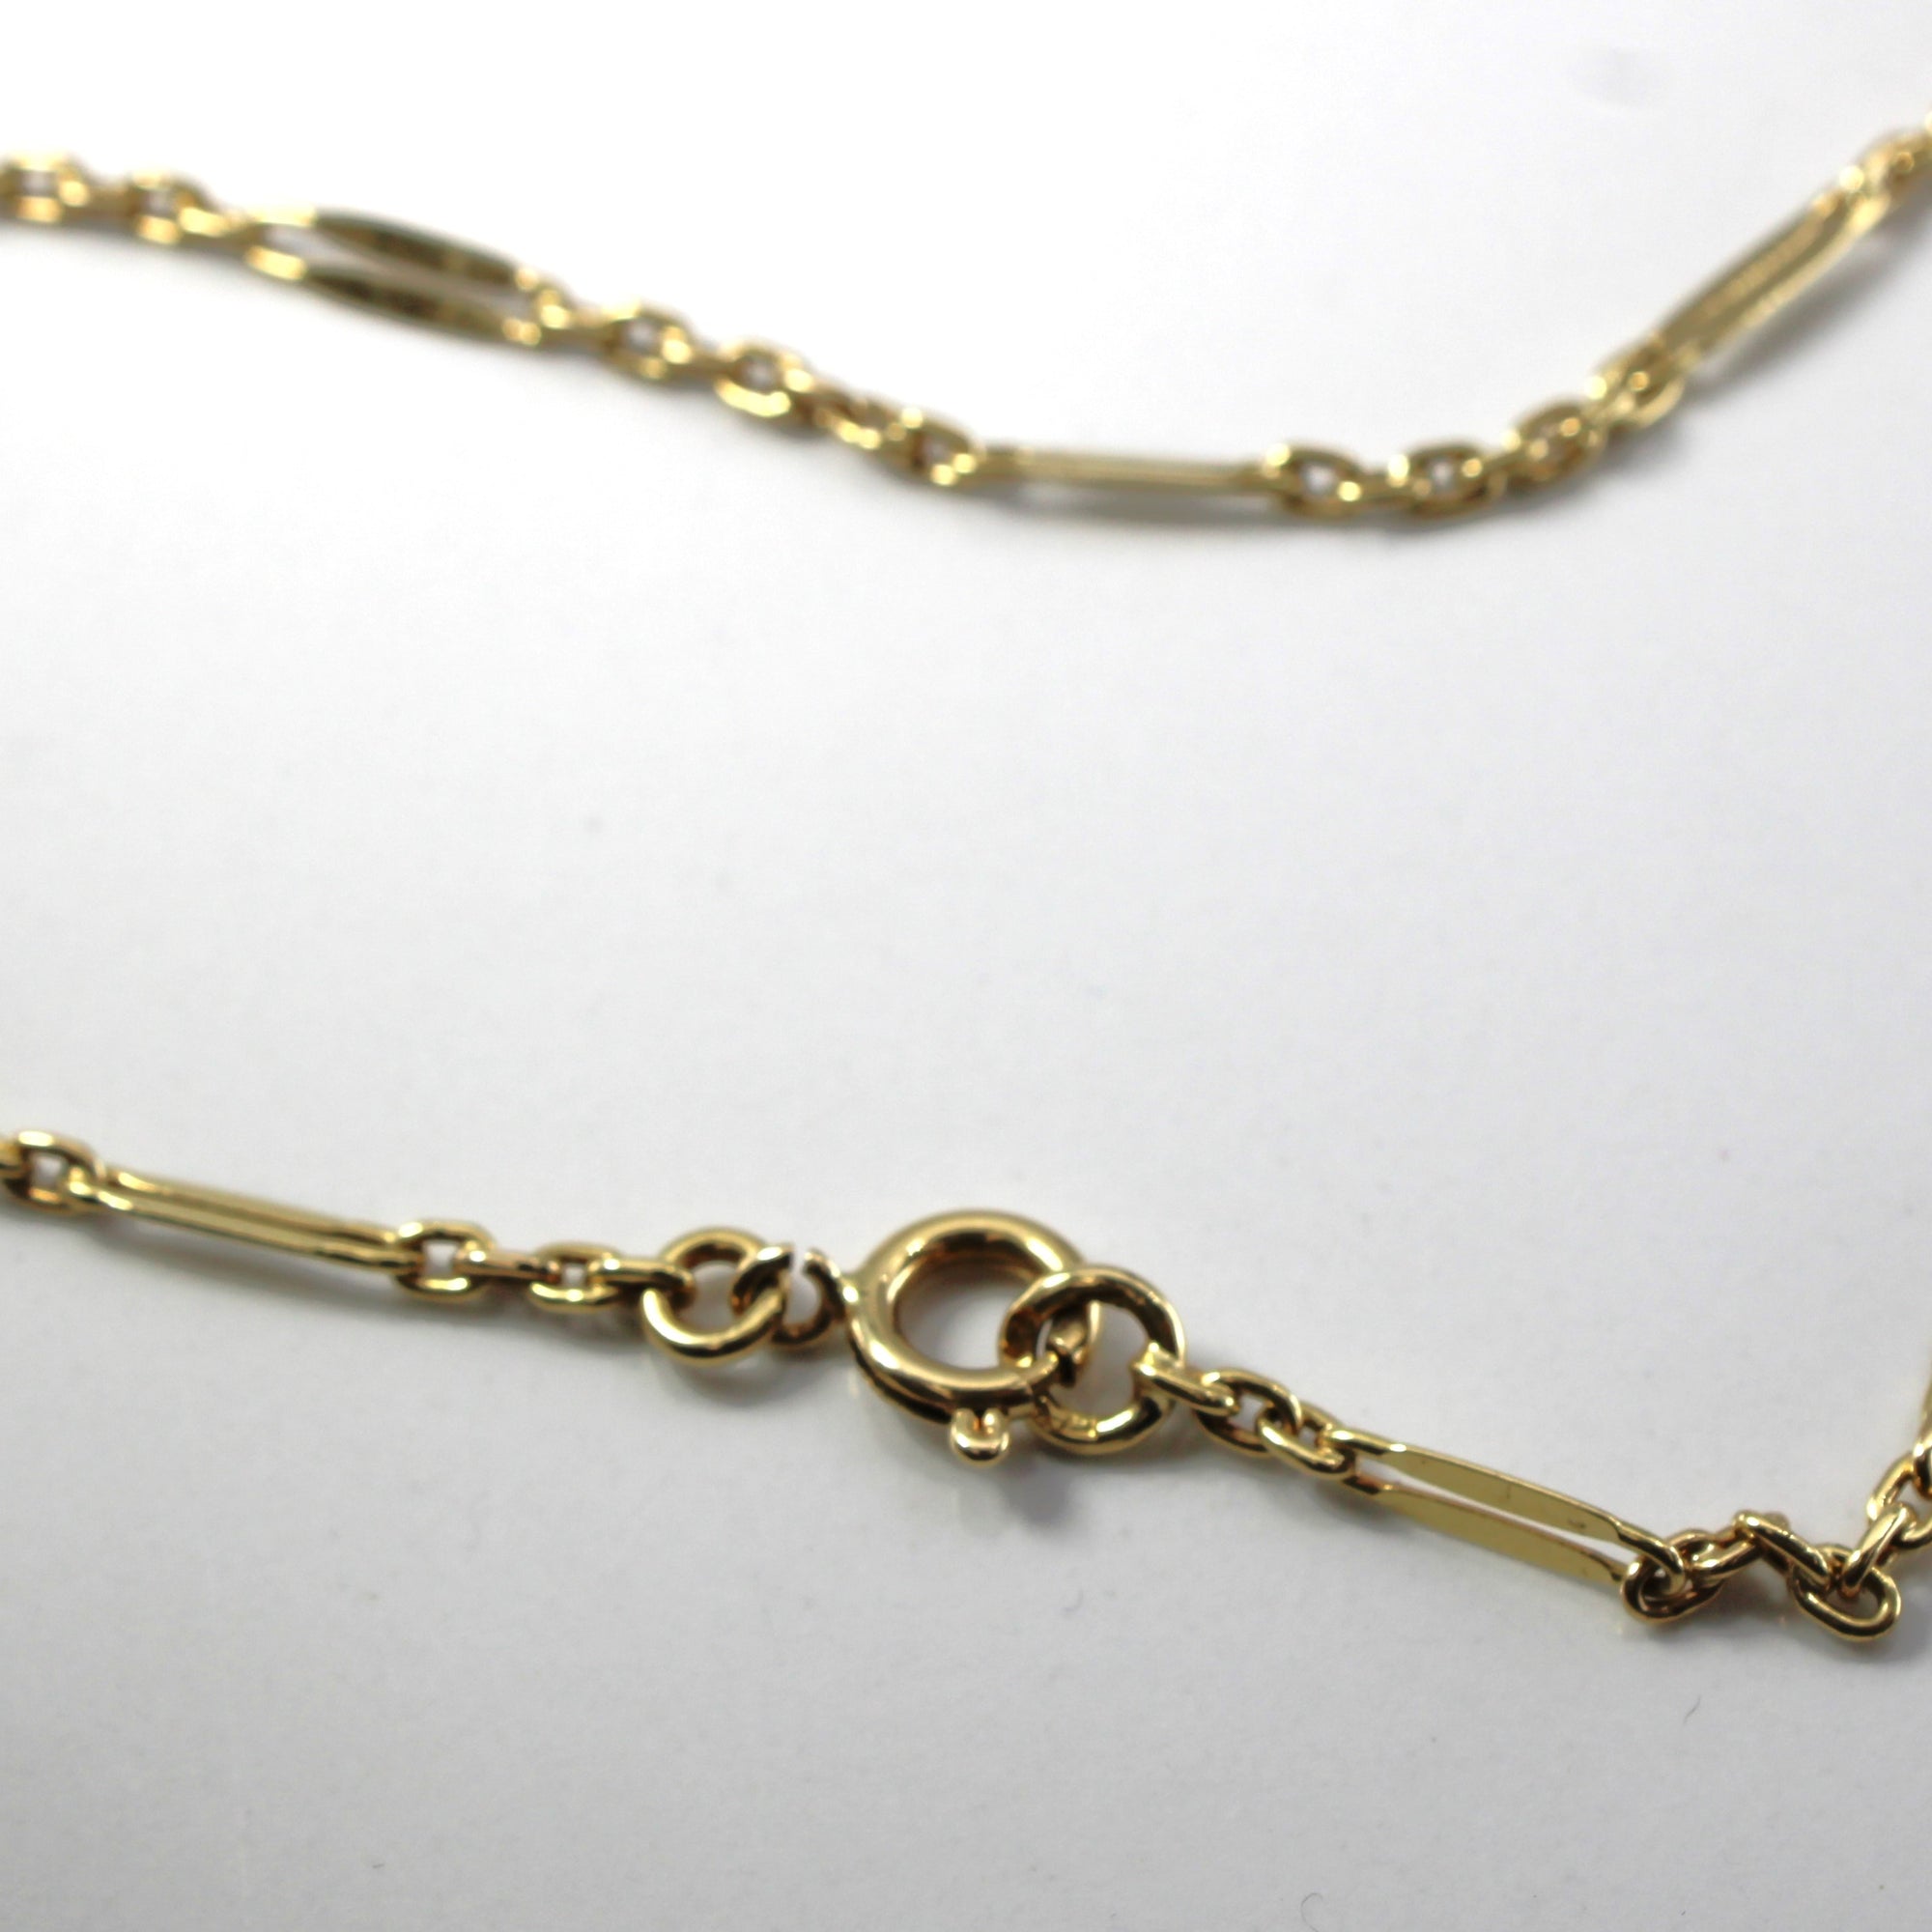 Bar and Ring Yellow Gold Linked Chain | 24